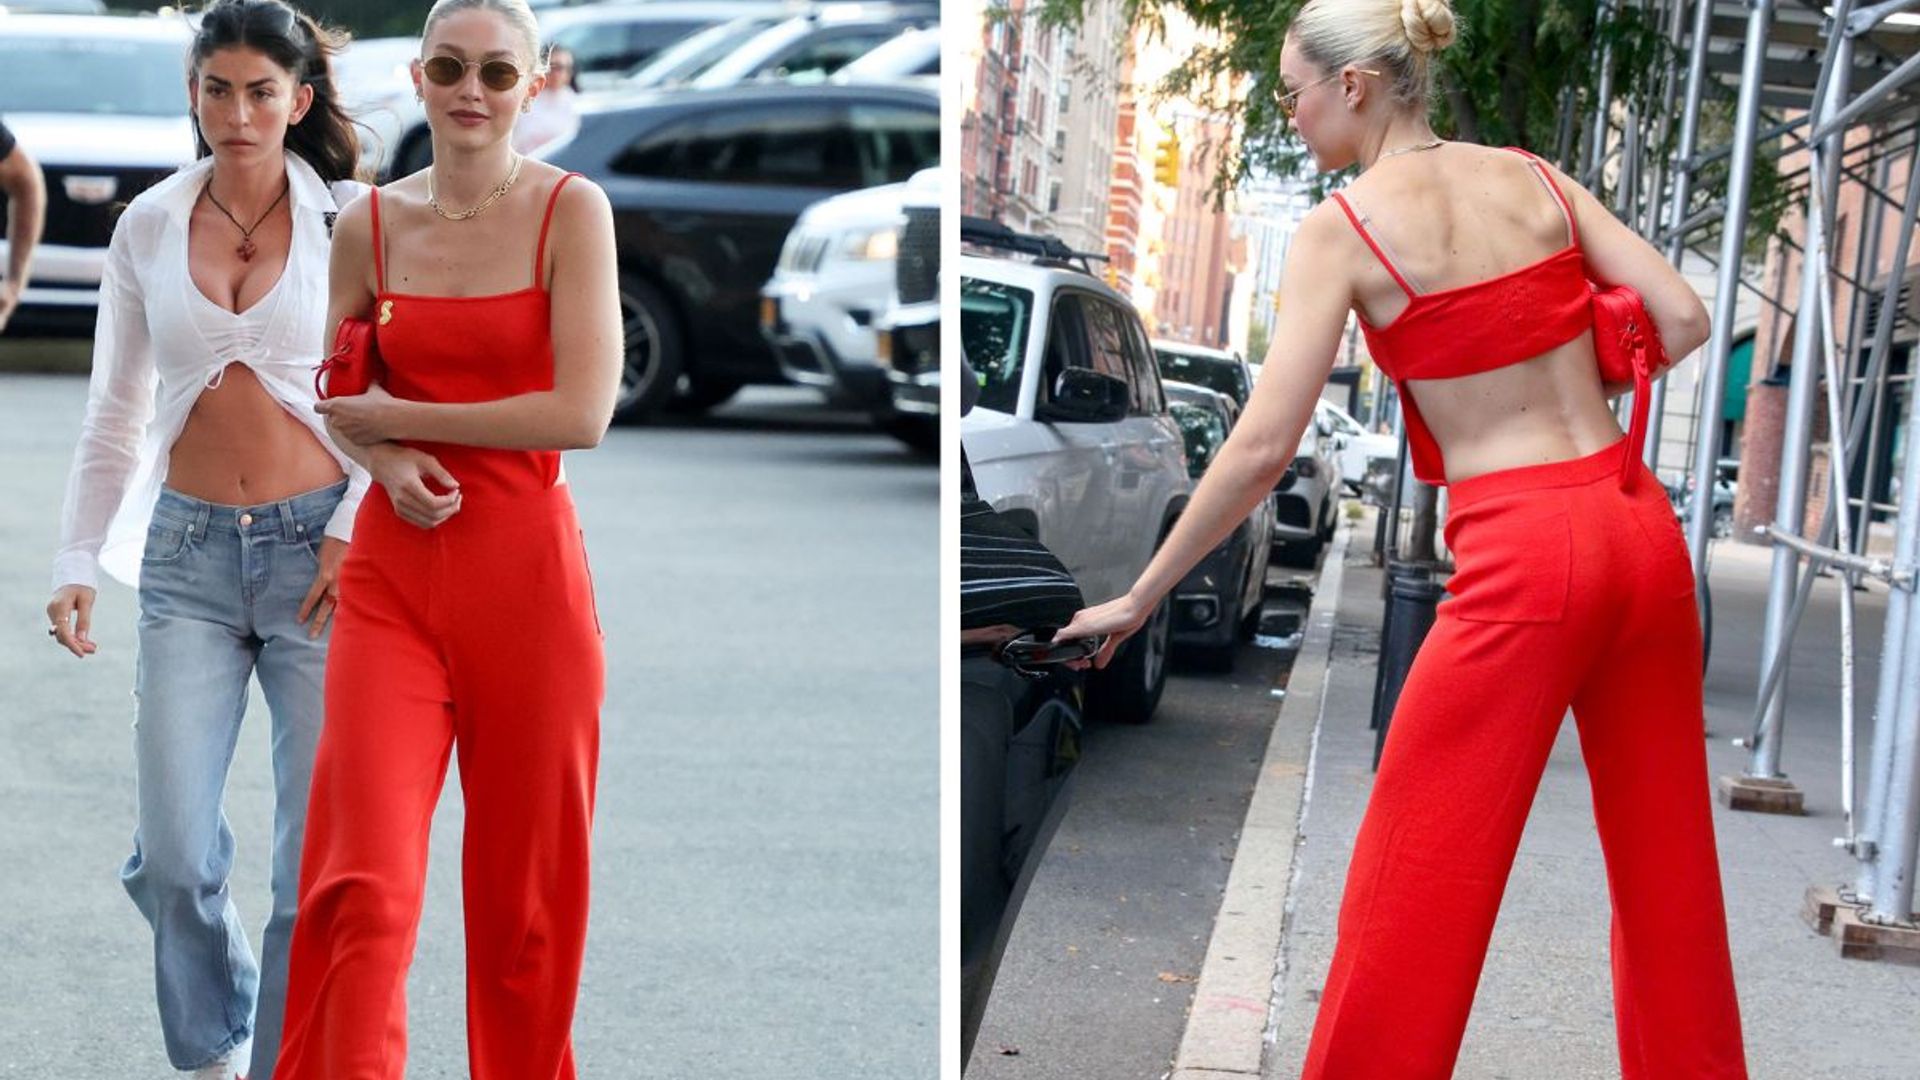 Gigi Hadid's US Open backless red jumpsuit has fans swooning - see photos